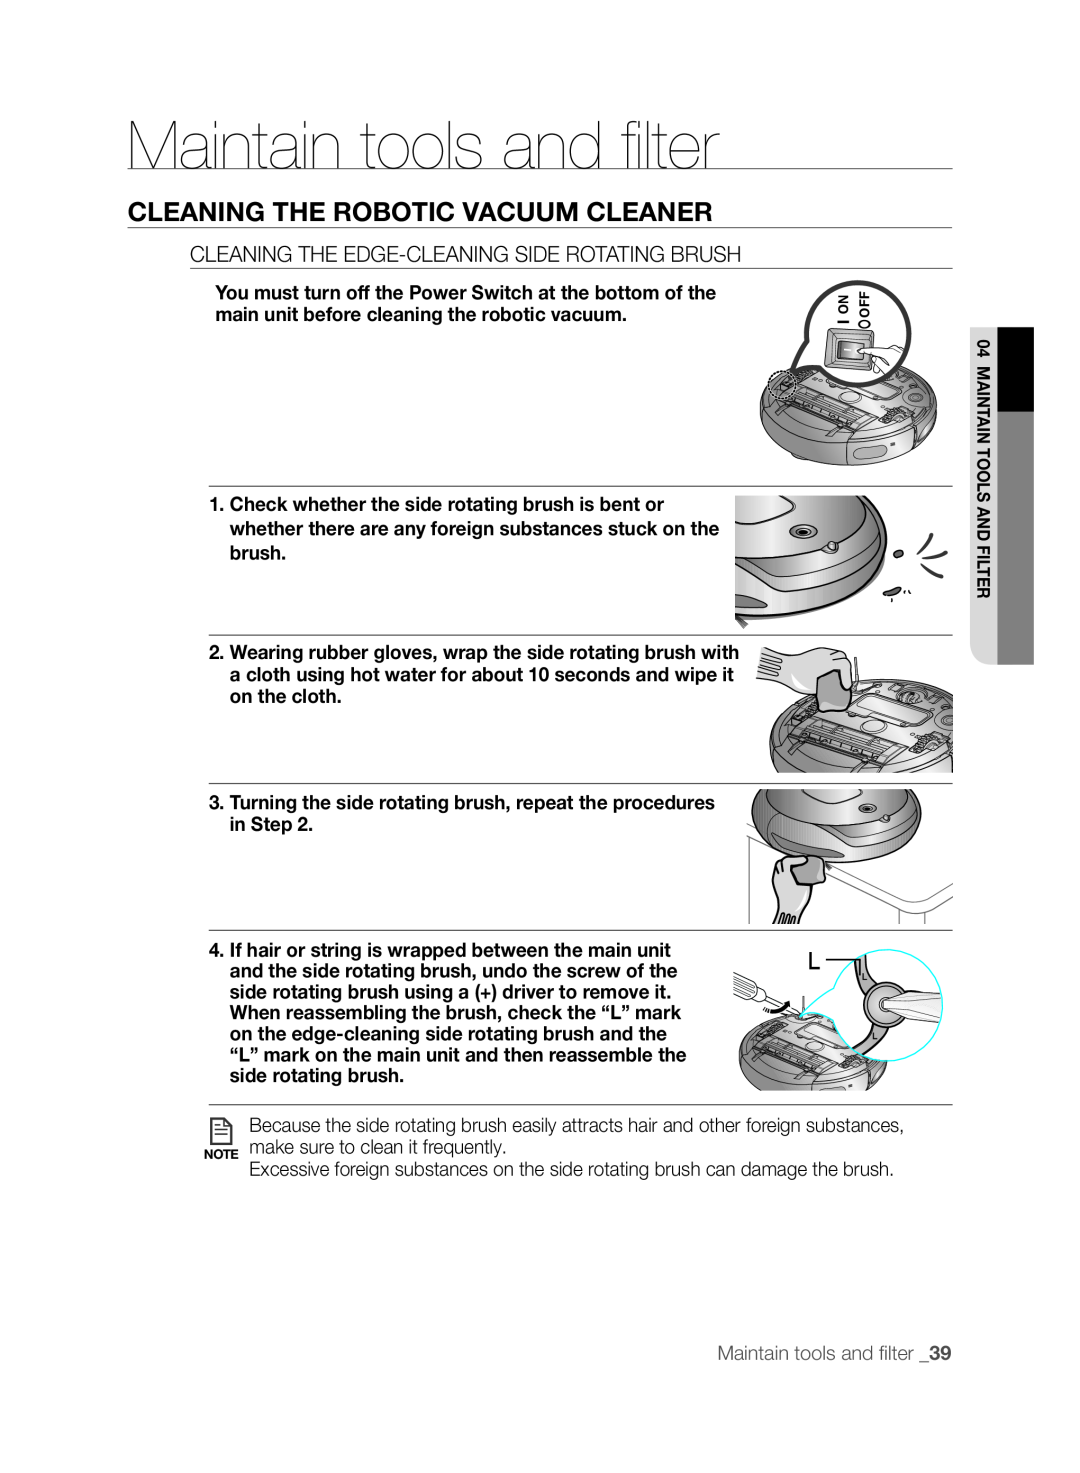 Samsung VCR8830T1R, SR8830, DJ68-00518A user manual Cleaning the robotic vacuum cleaner, Maintain tools and filter _39 